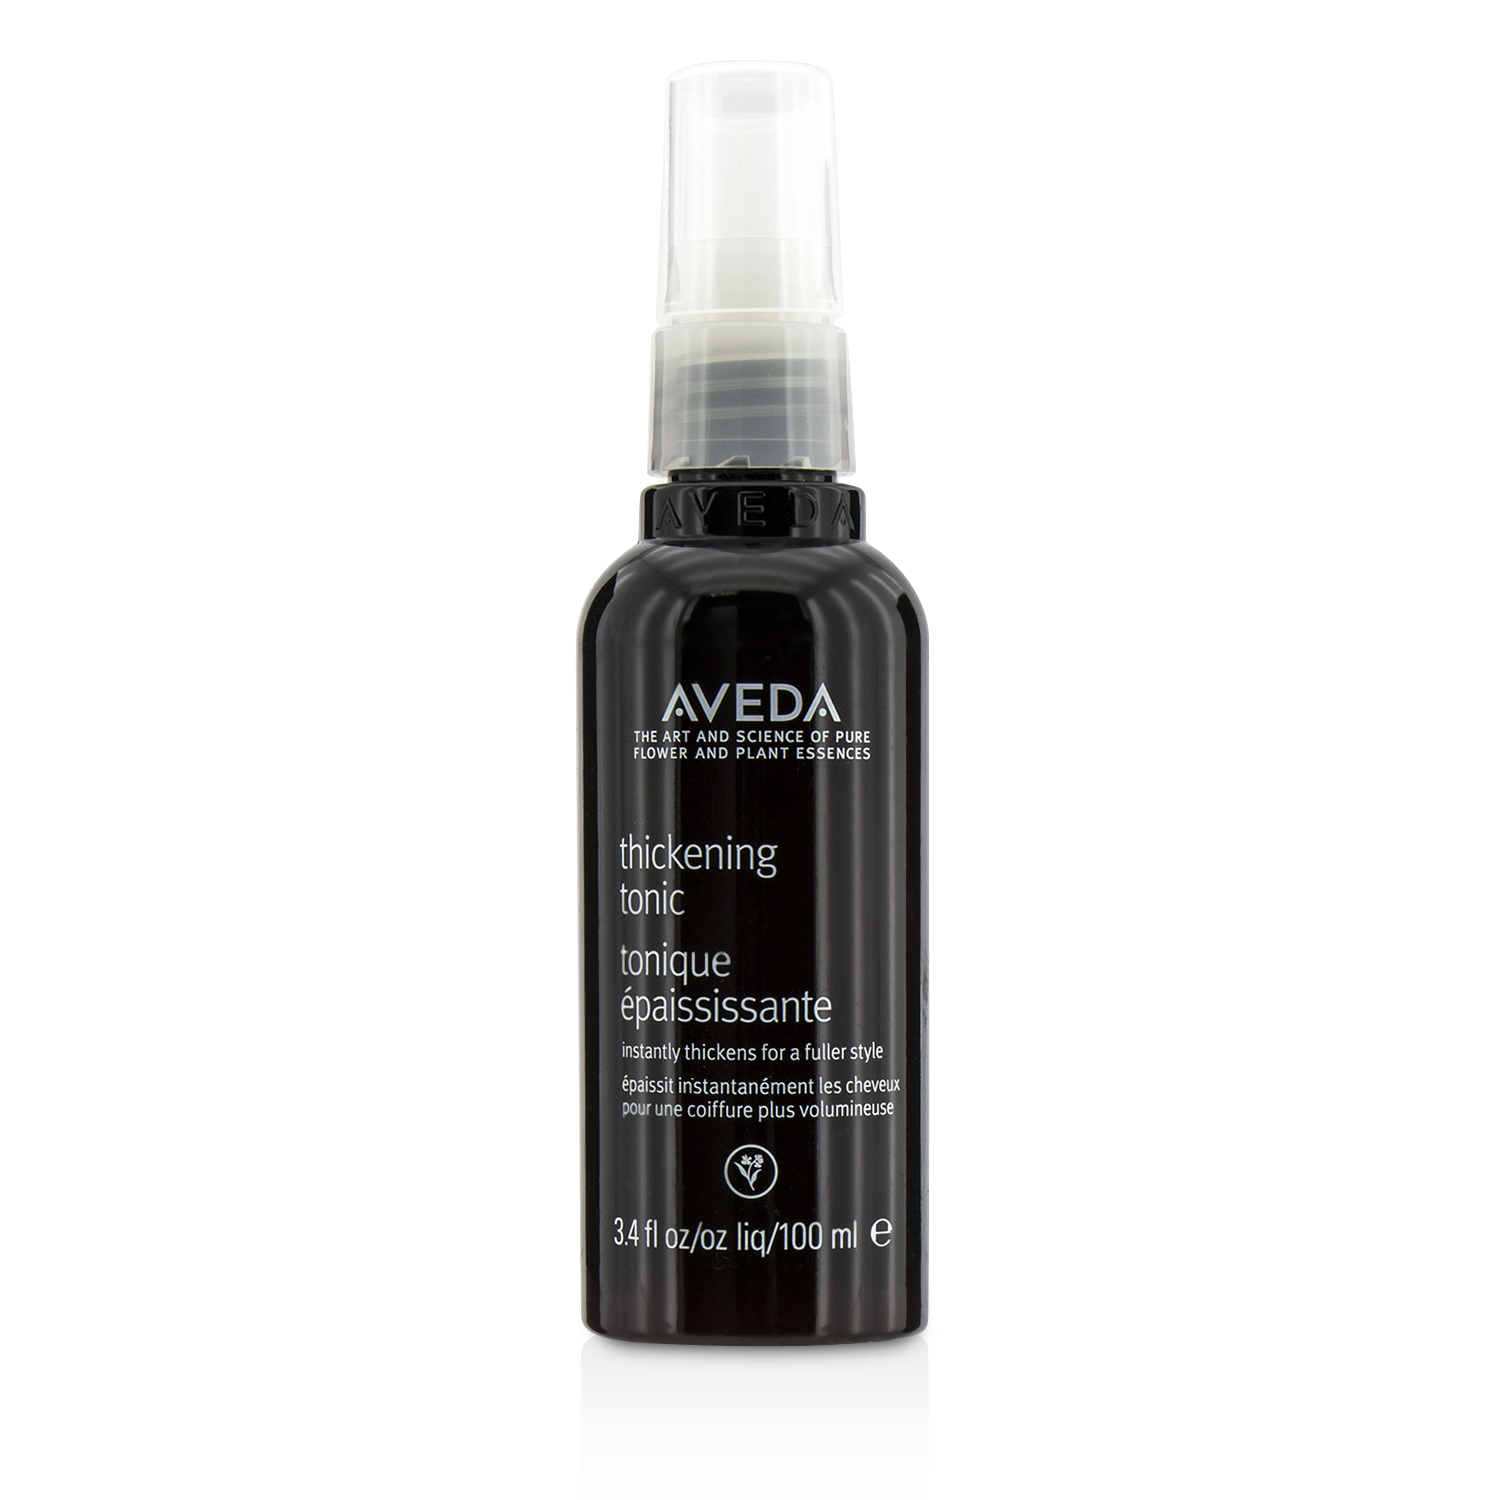 Thickening Tonic (Instantly Thickens For A Fuller Style) Aveda Image